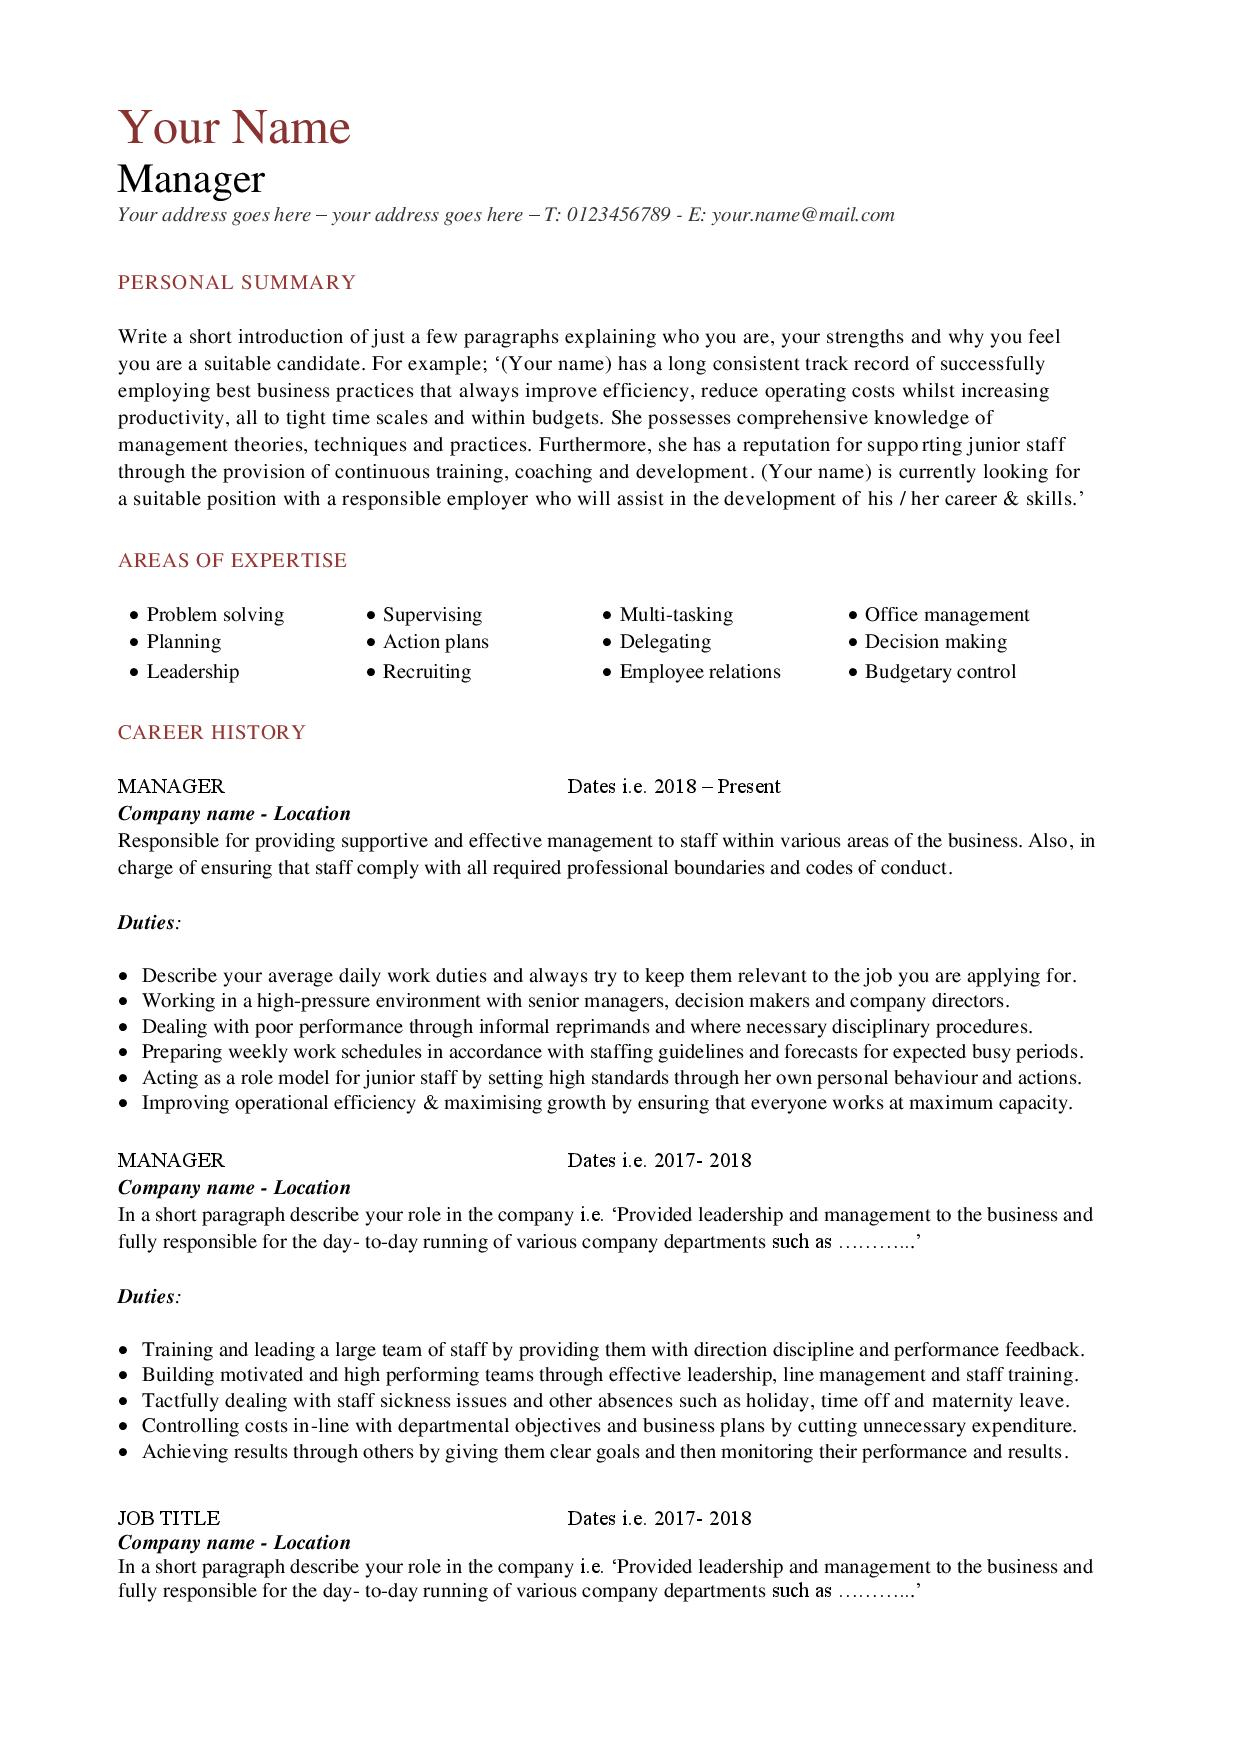 Cv Templates Impress Employers within dimensions 1240 X 1754